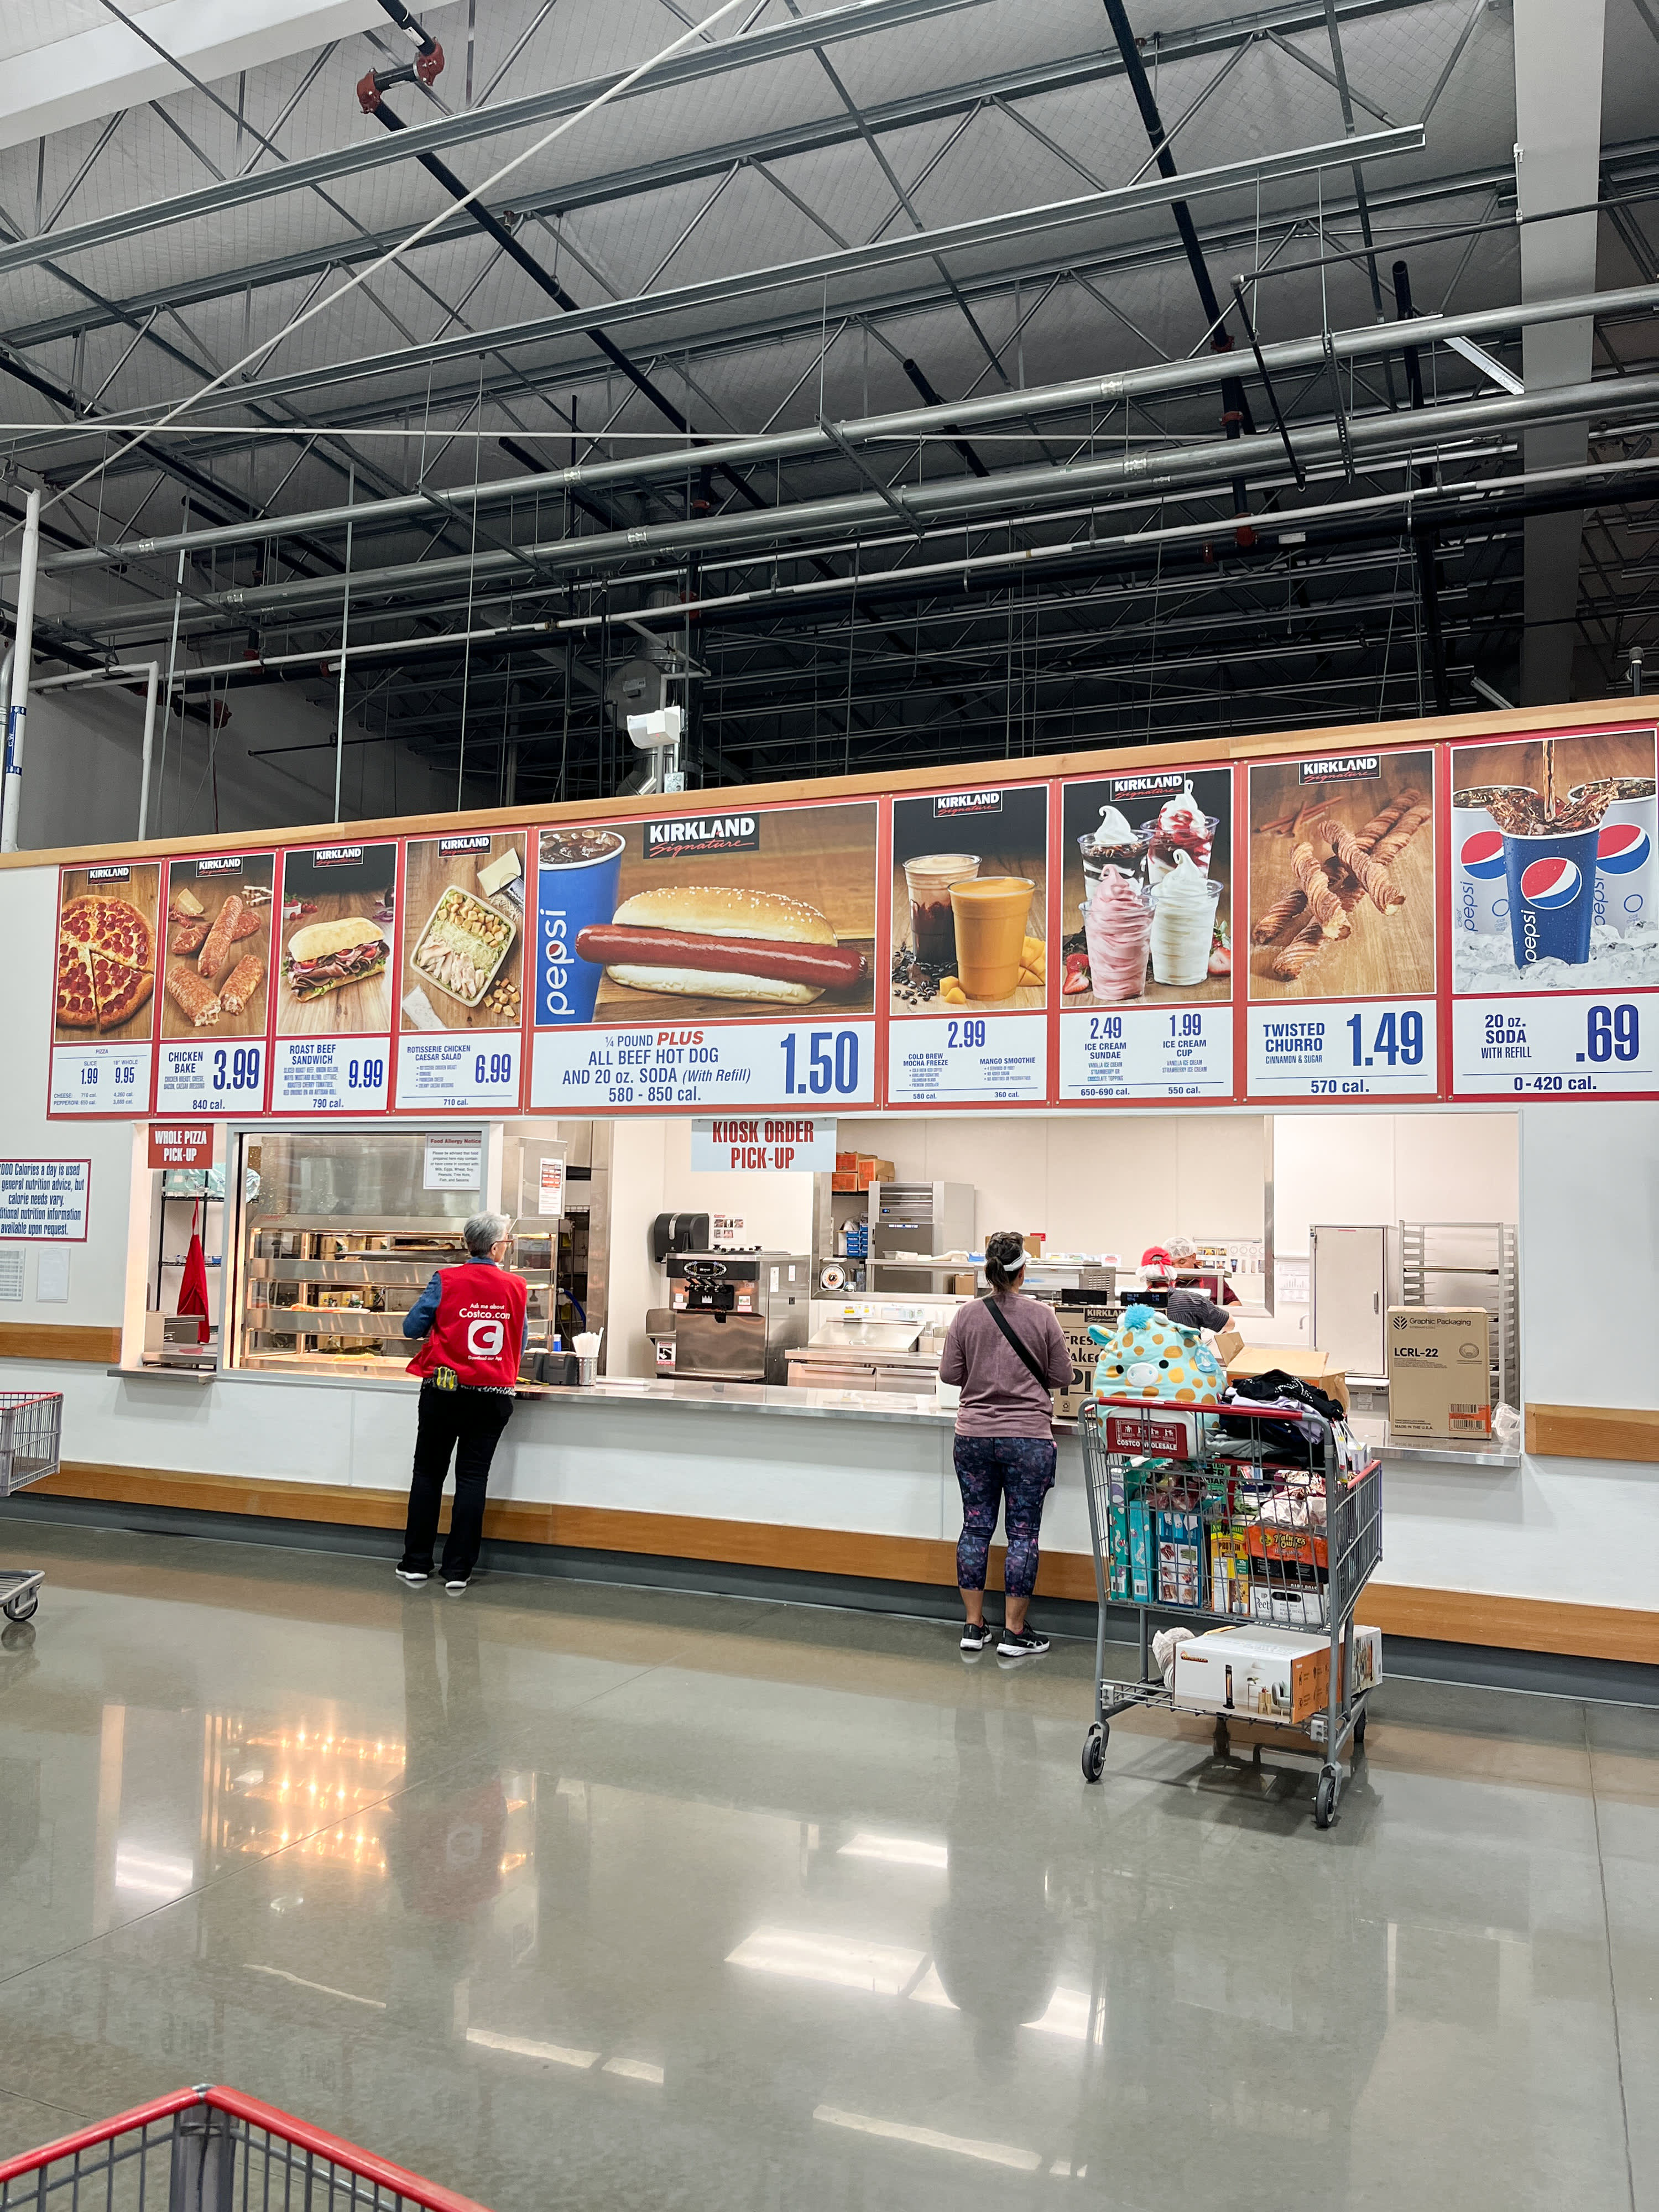 10 Things to Know About Costco's Food Court (Menu & Prices)